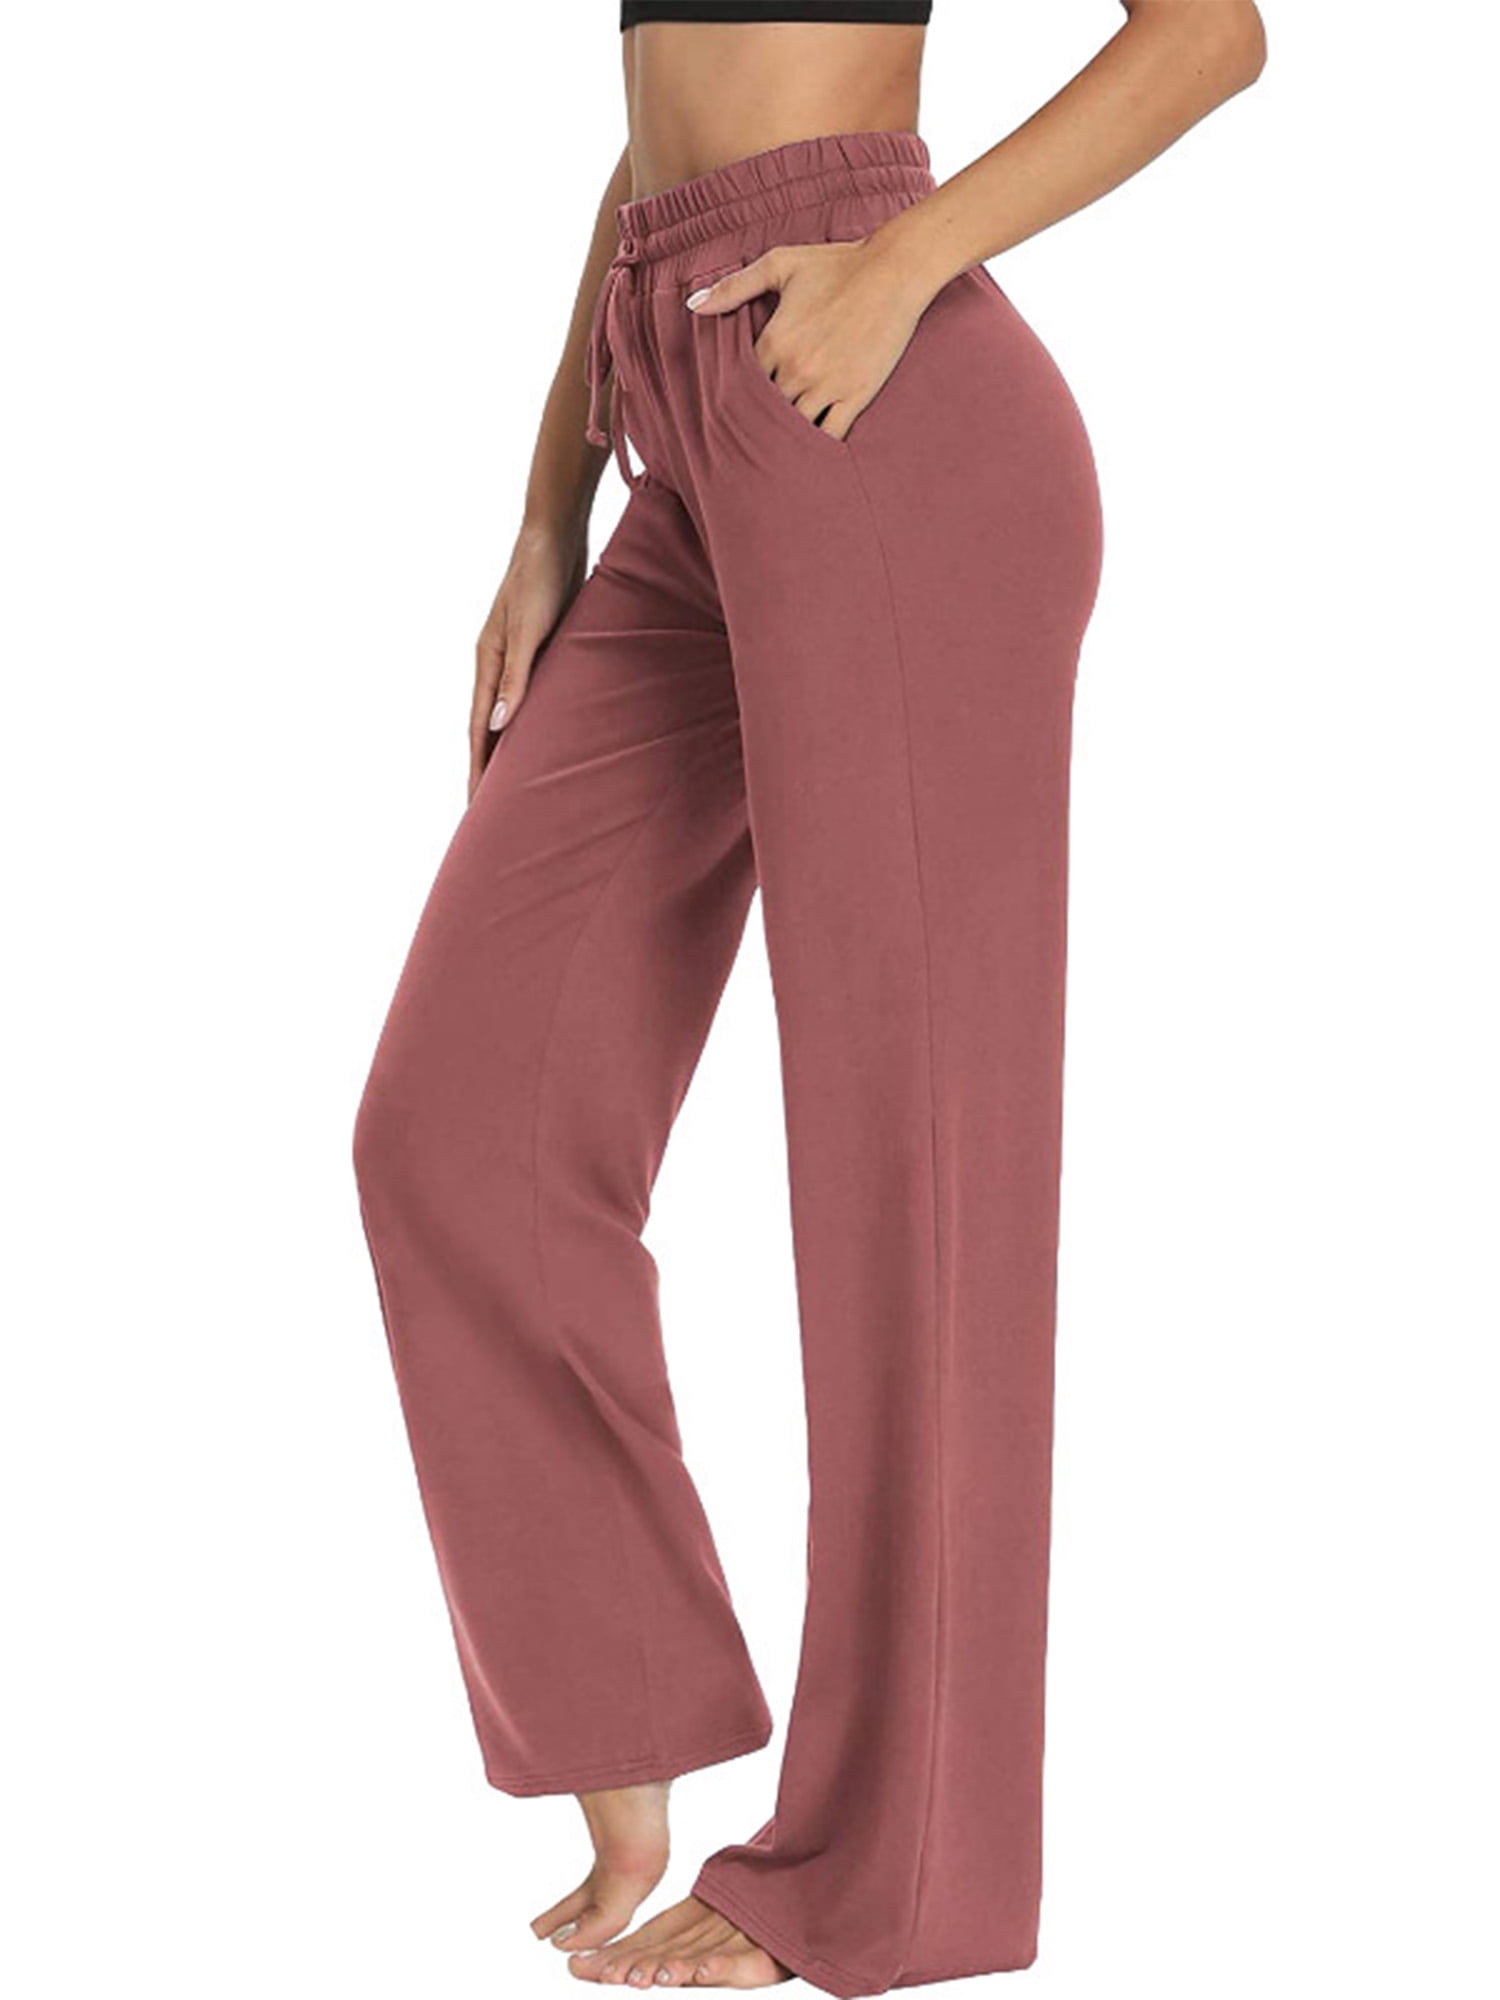 Soothfeel Wide Leg Pants for Women Yoga Work Pants with Pockets